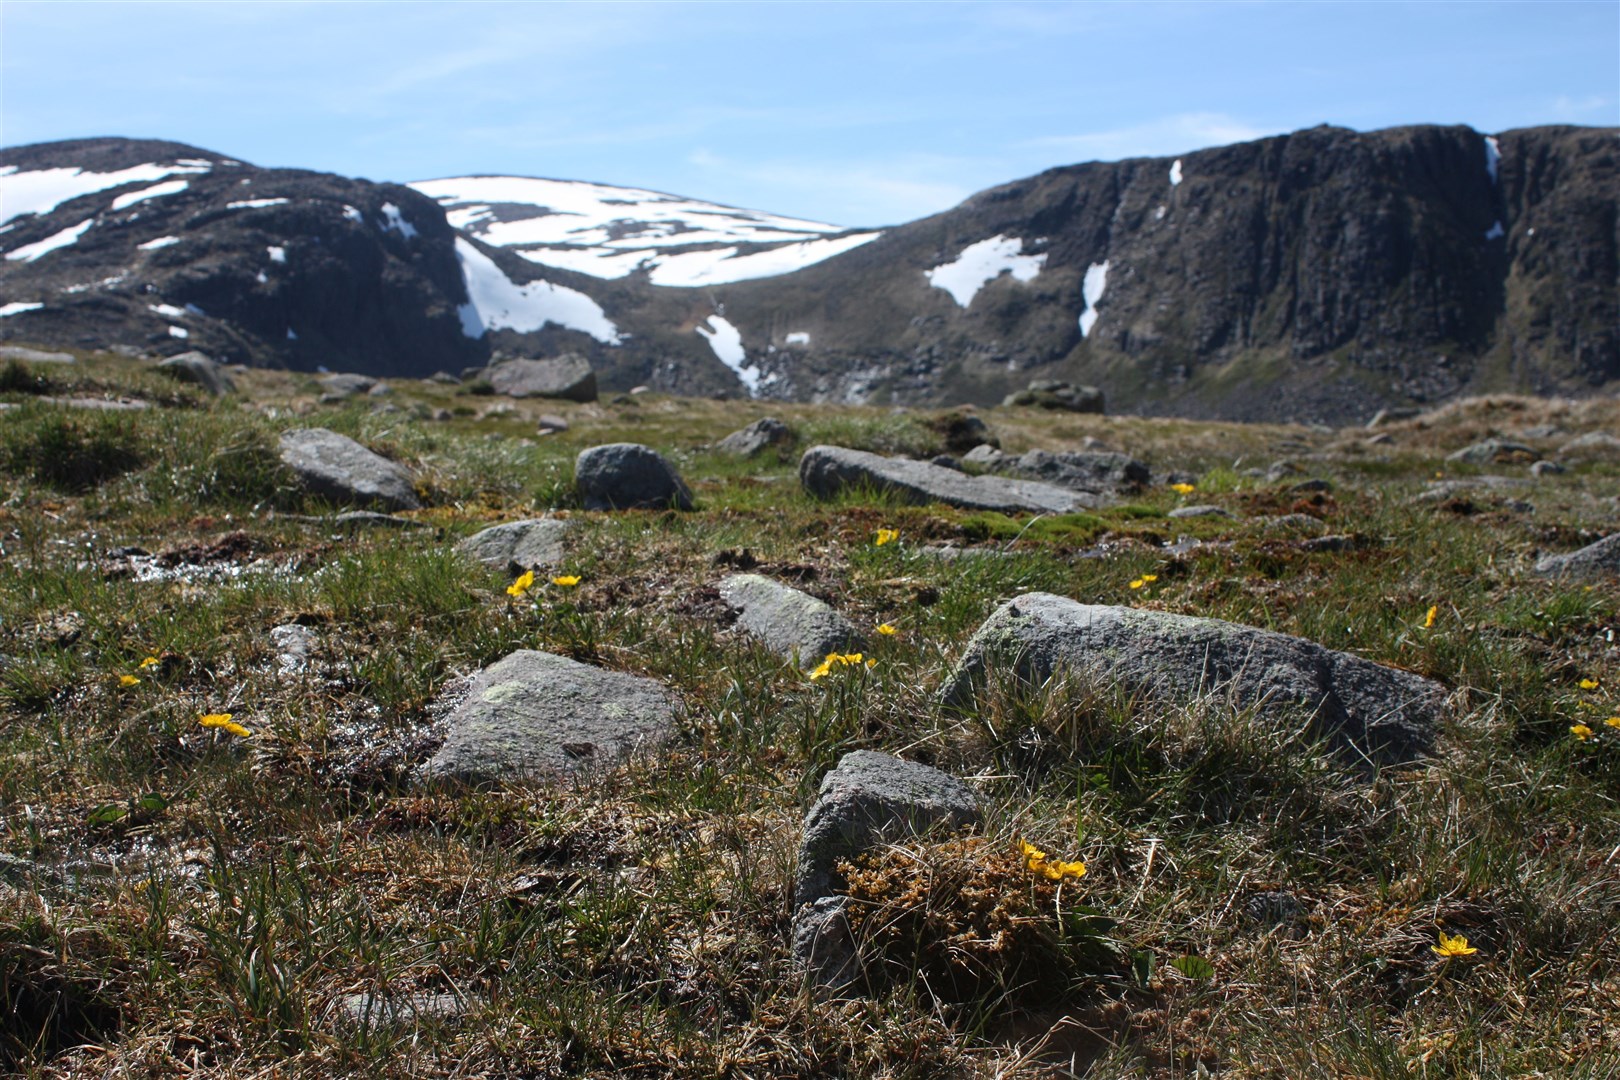 The study will look at fungi in the soil on the Cairngorms plateau. Picture: Alistair Whyte